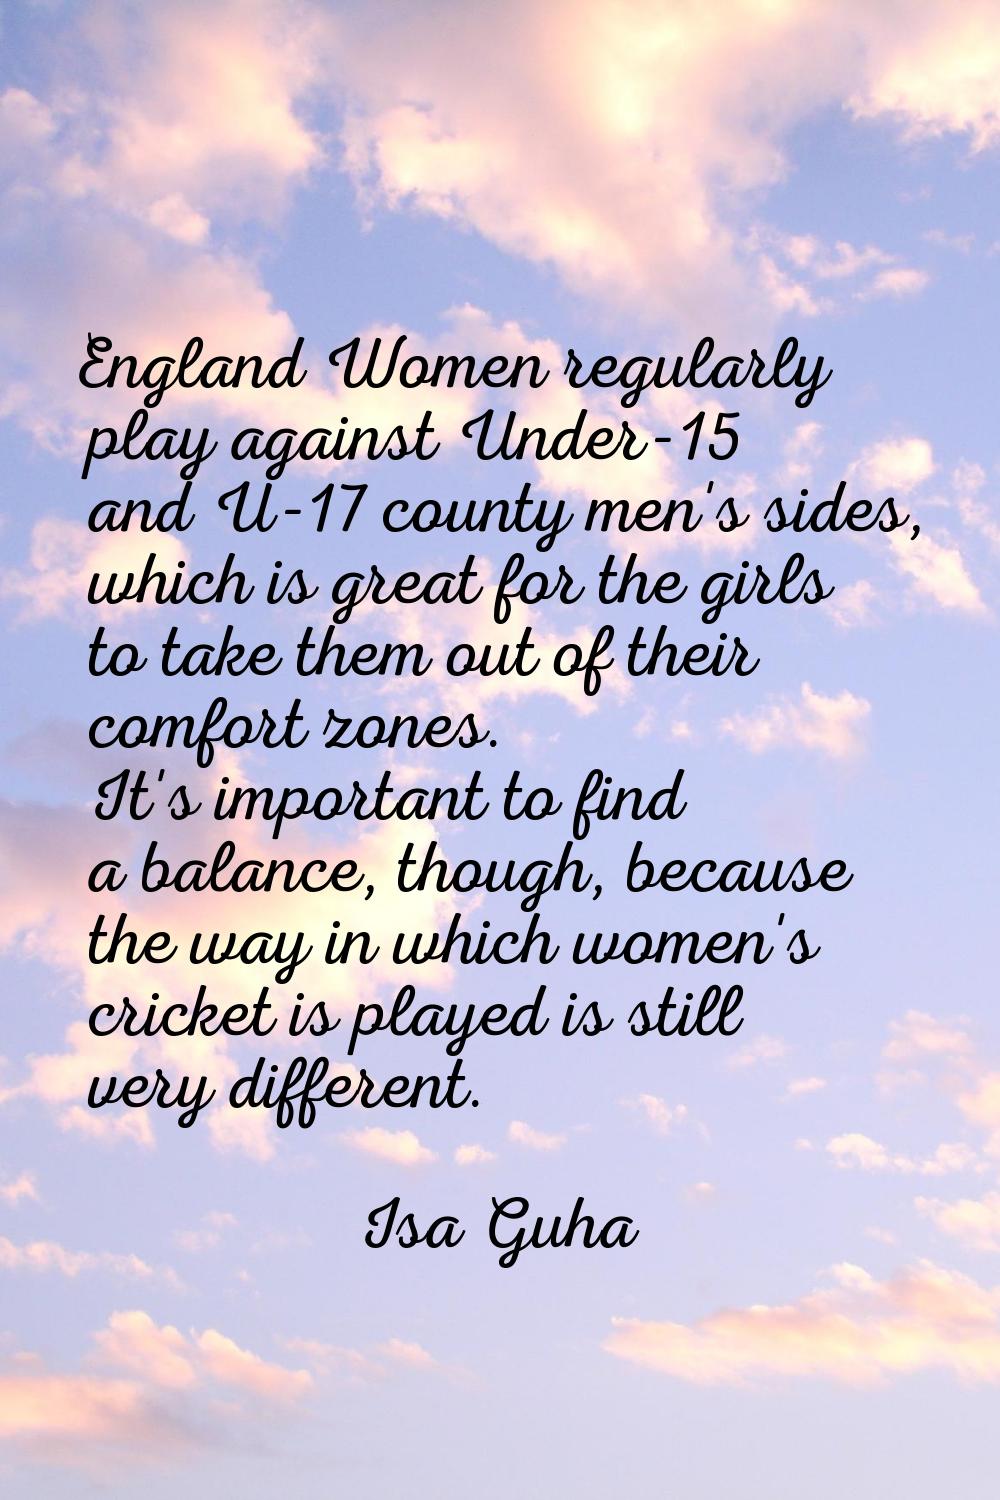 England Women regularly play against Under-15 and U-17 county men's sides, which is great for the g